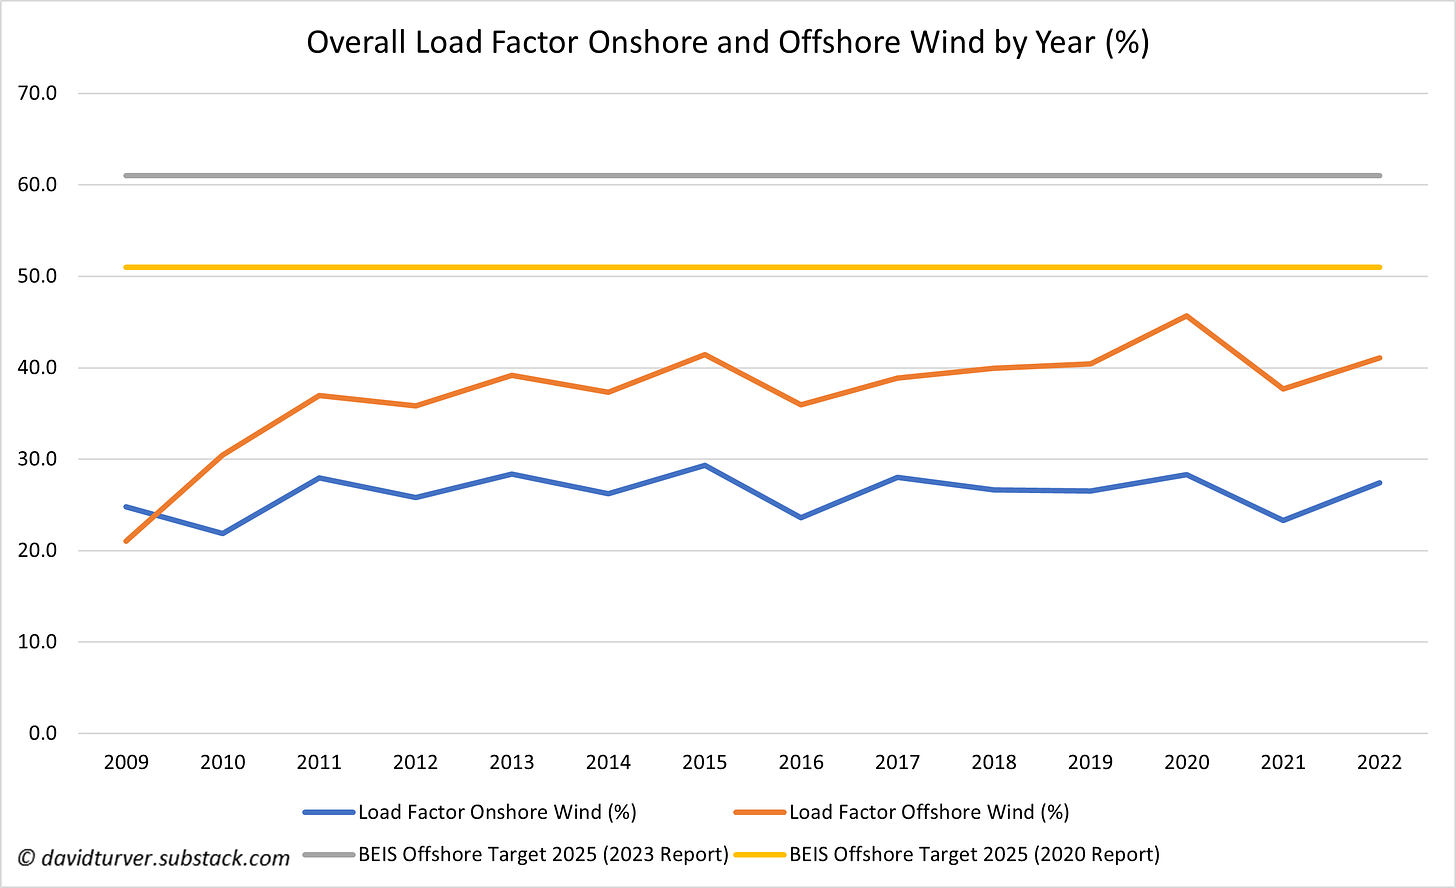 Figure 4 - Comparison of Actual and Forecast Wind Power Load Factors